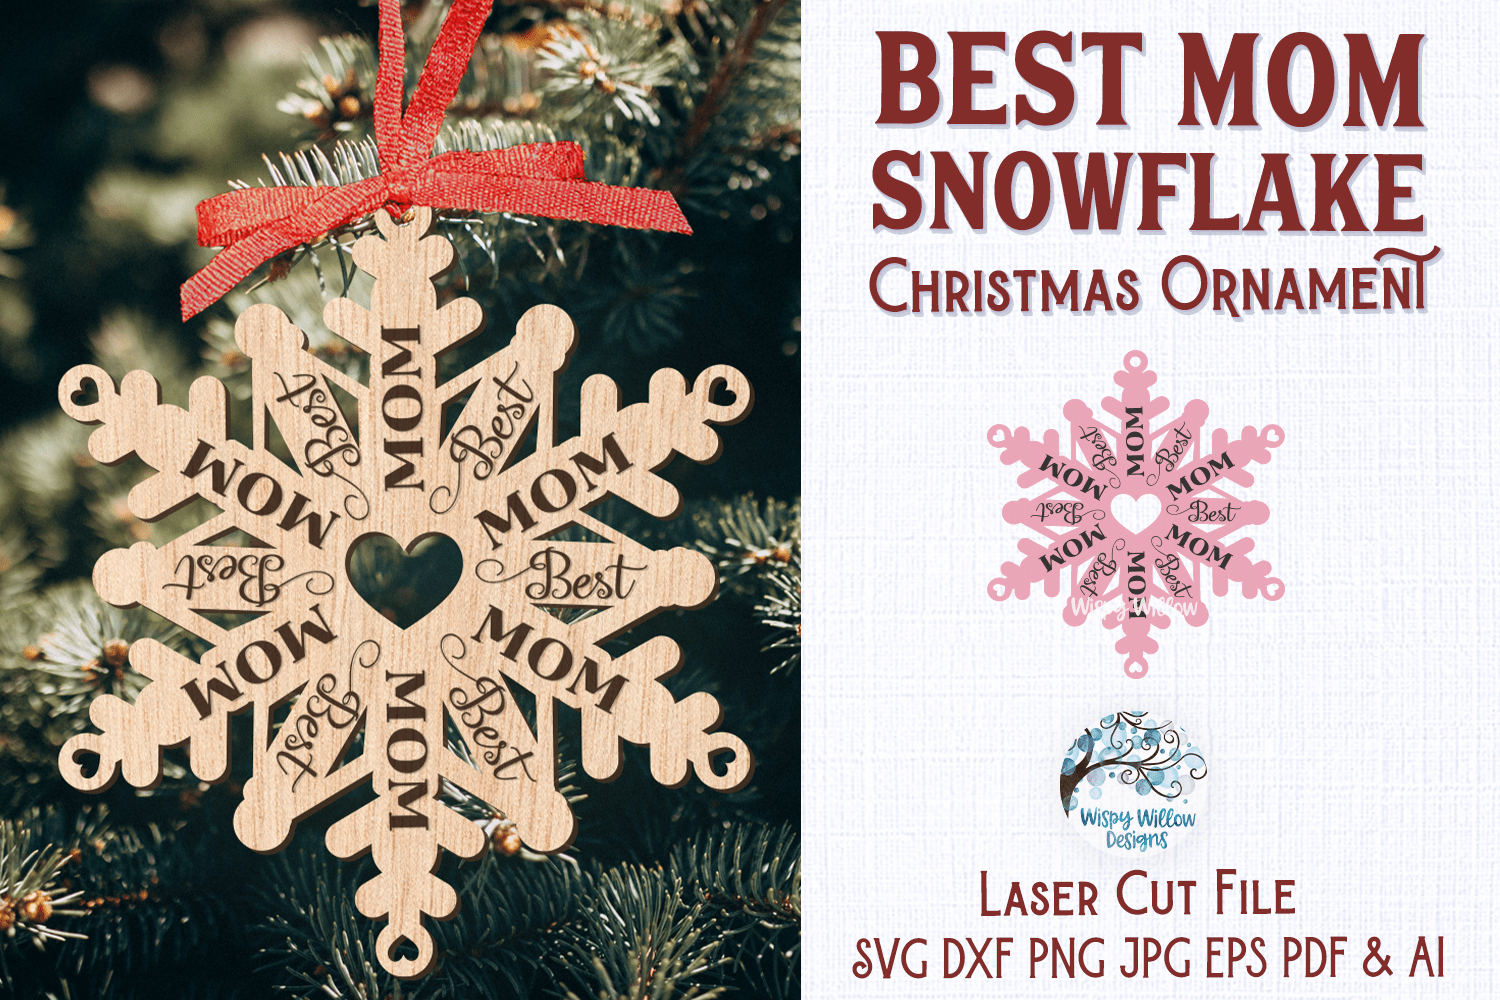 Best Mom Snowflake Christmas Ornament for Glowforge or Laser Cutter Wispy Willow Designs Company